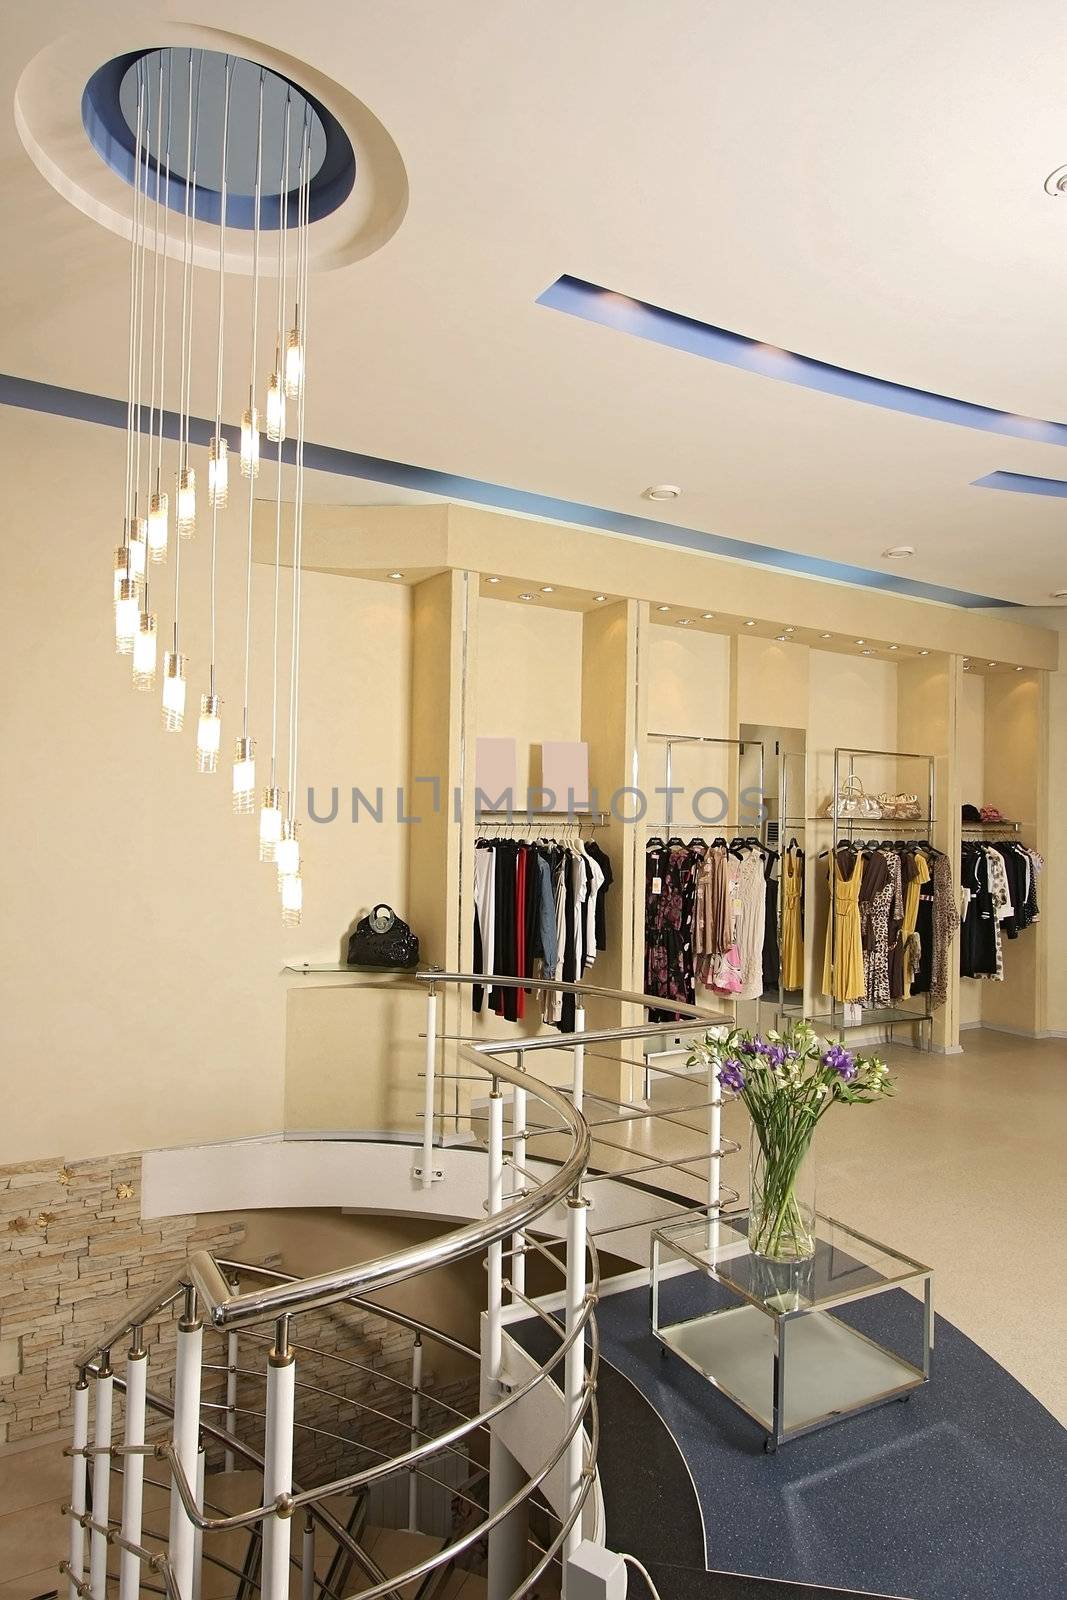 Interior of the big shop of fashionable clothes